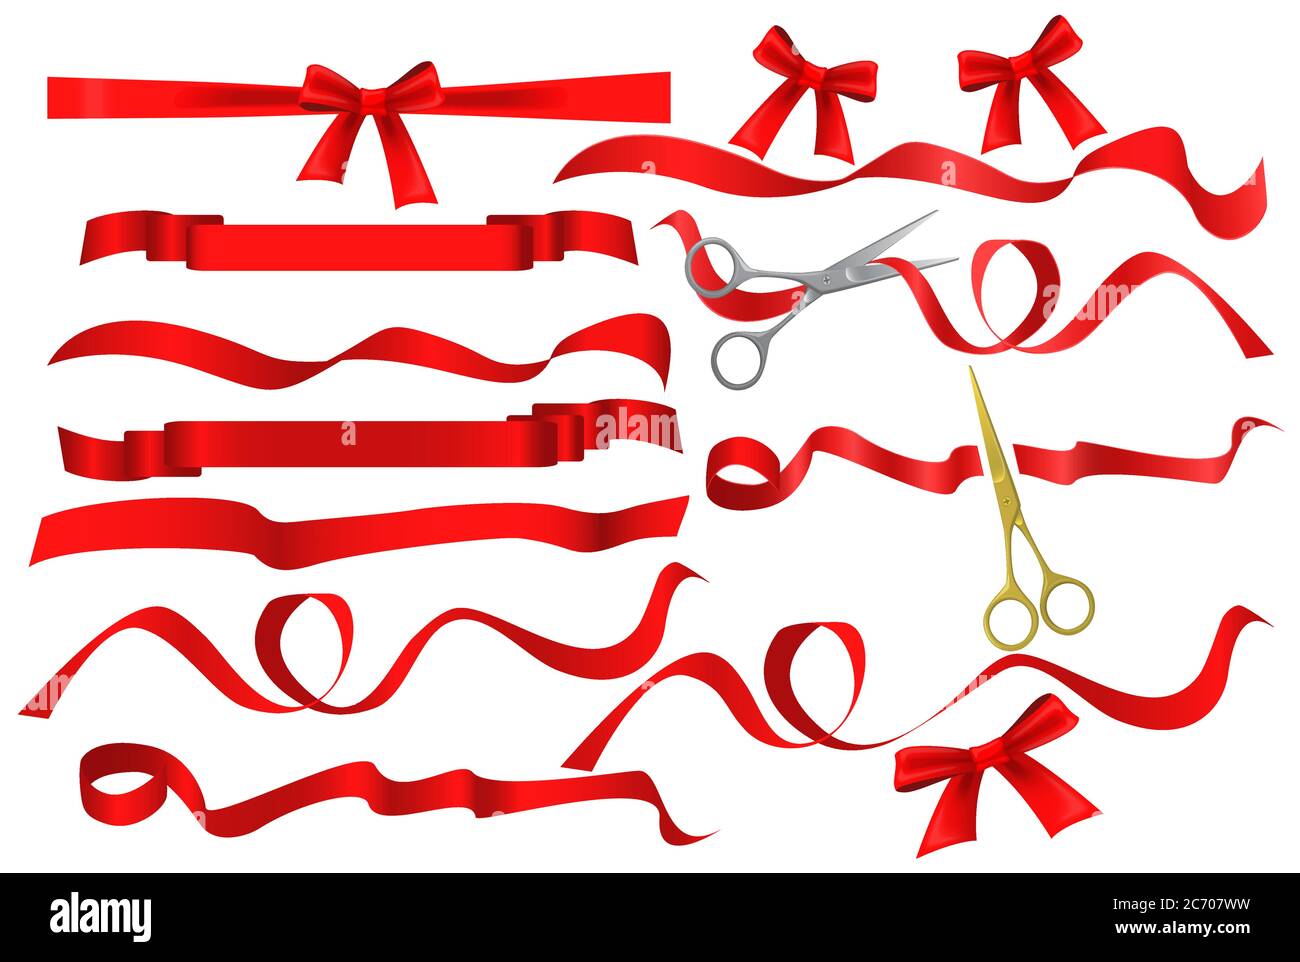 Metal chrome and golden scissors cutting red silk ribbon. Realistic opening ceremony symbols Tapes ribbons and scissors set. Grand opening inauguration event public ceremony Stock Vector